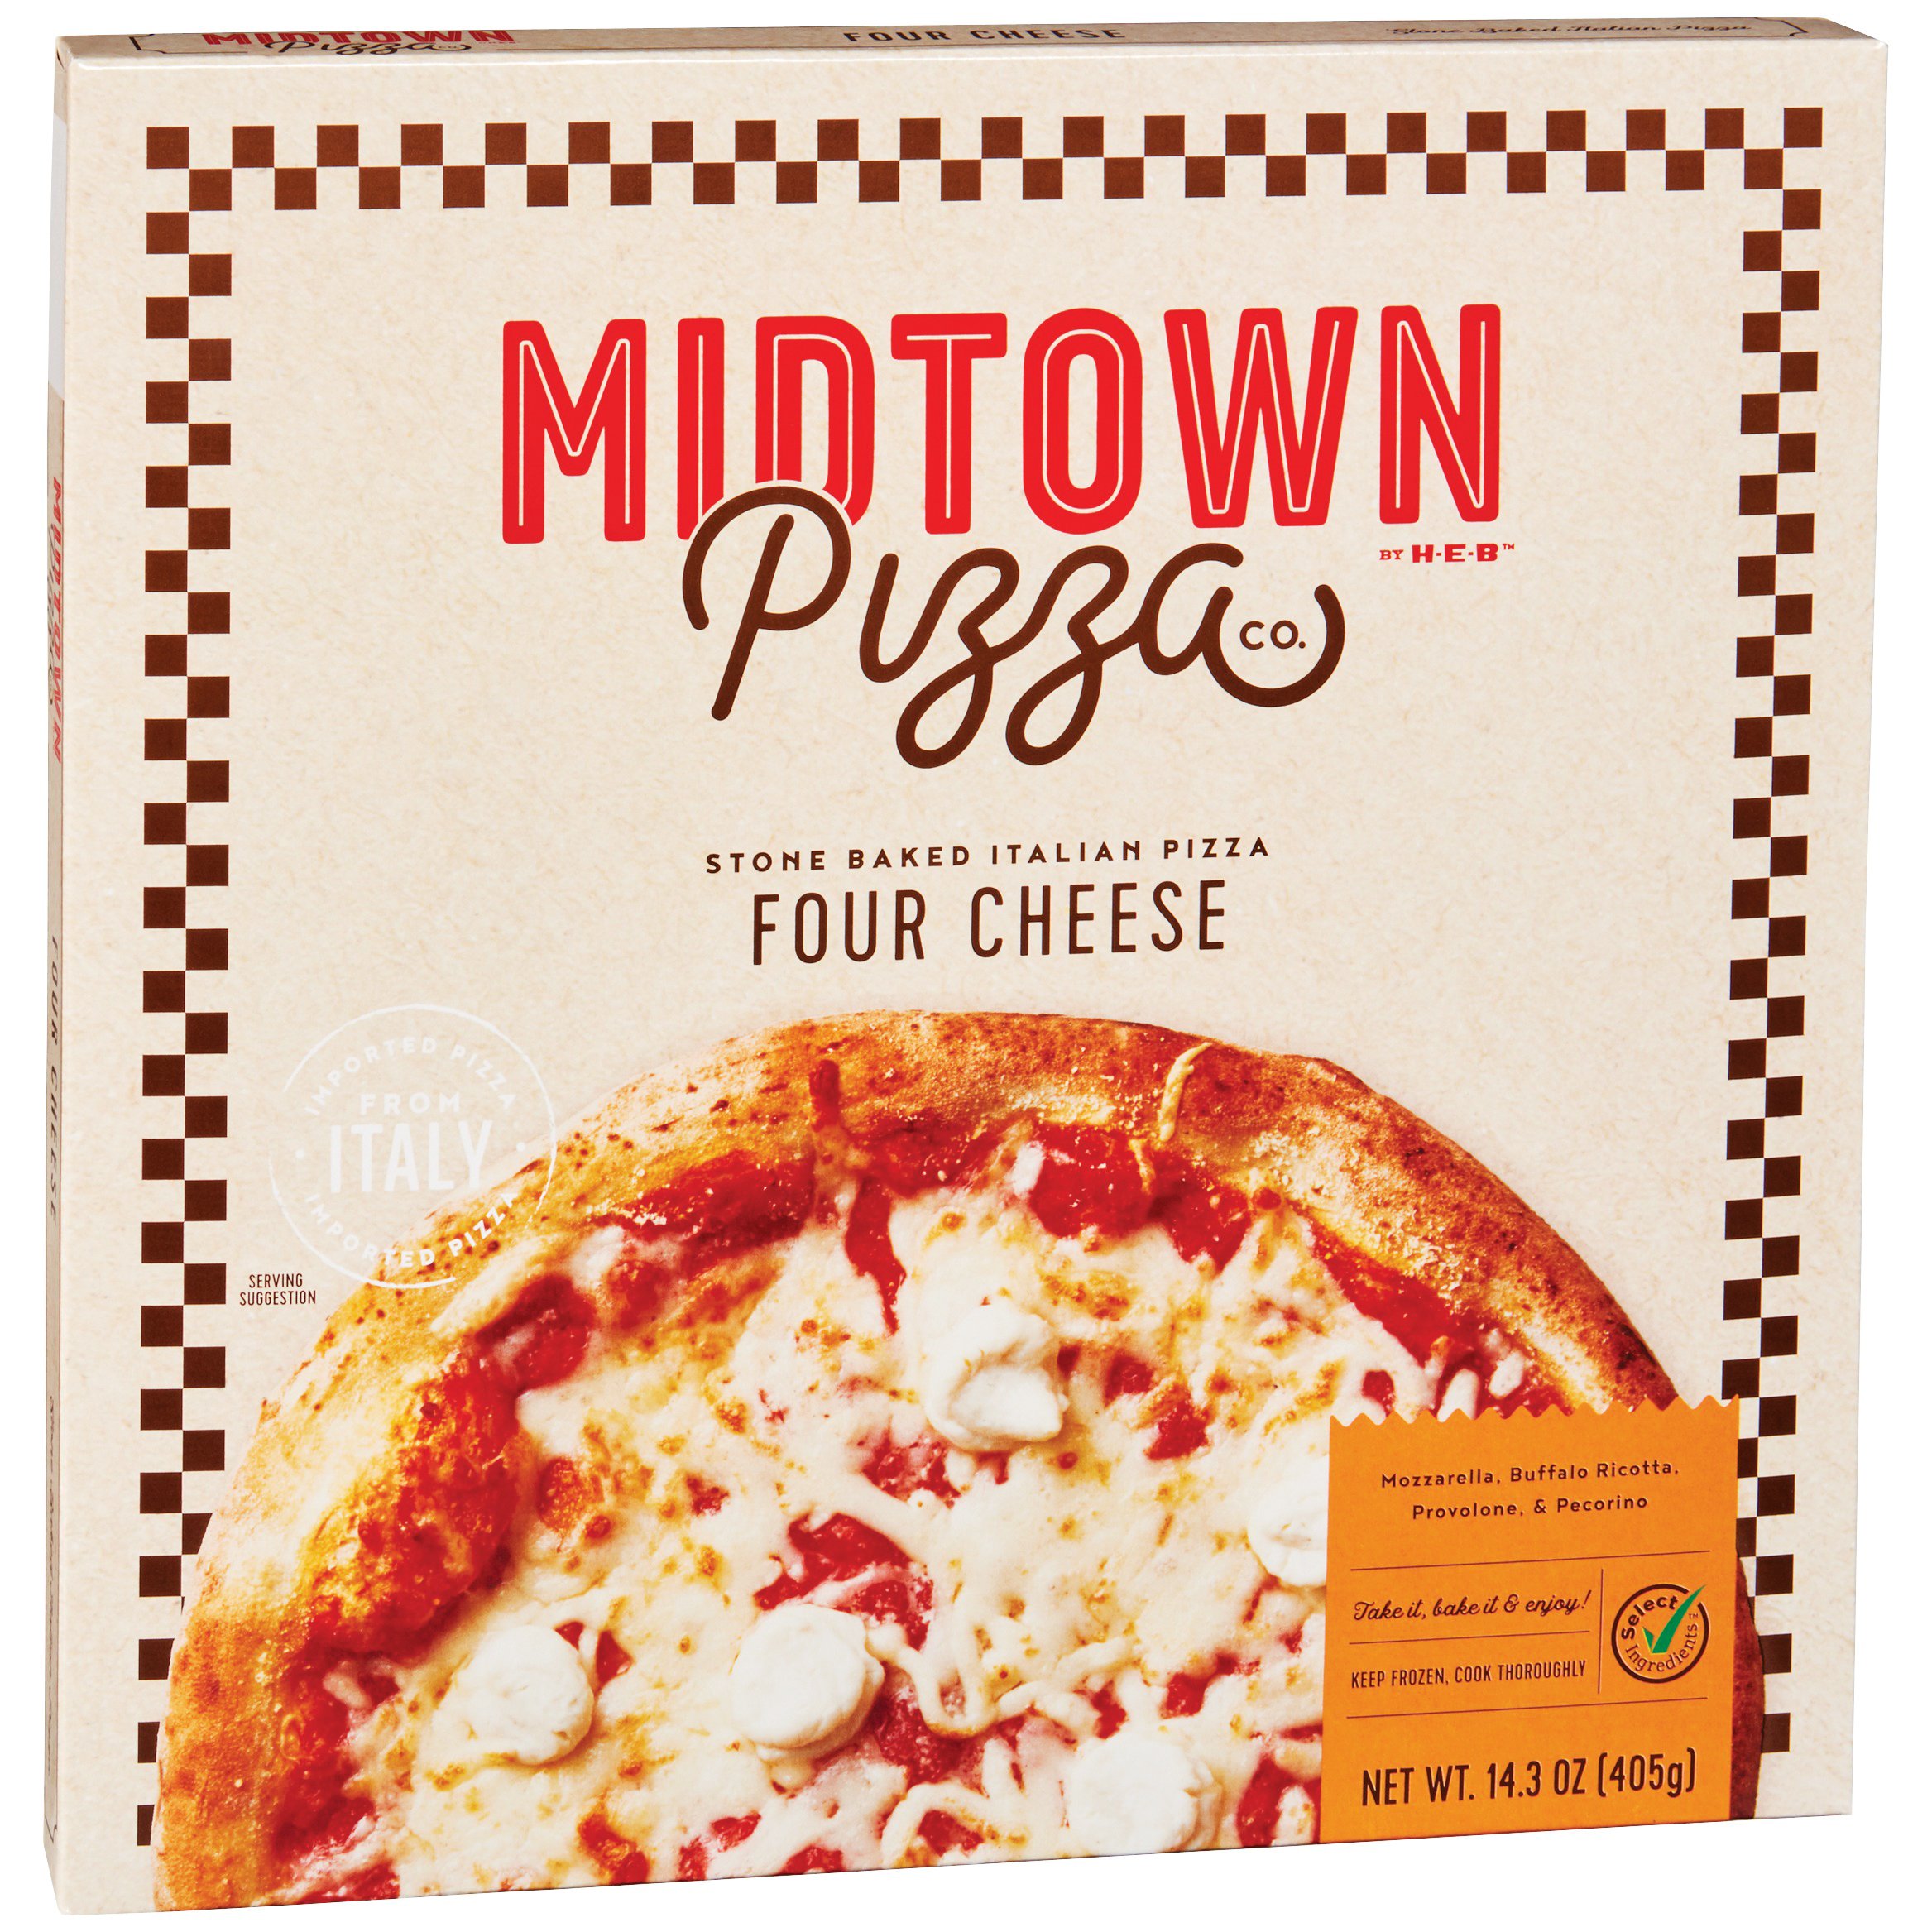 Midtown Pizza Co. by H-E-B Frozen Pizza - Four Cheese - Shop Pizza at H-E-B